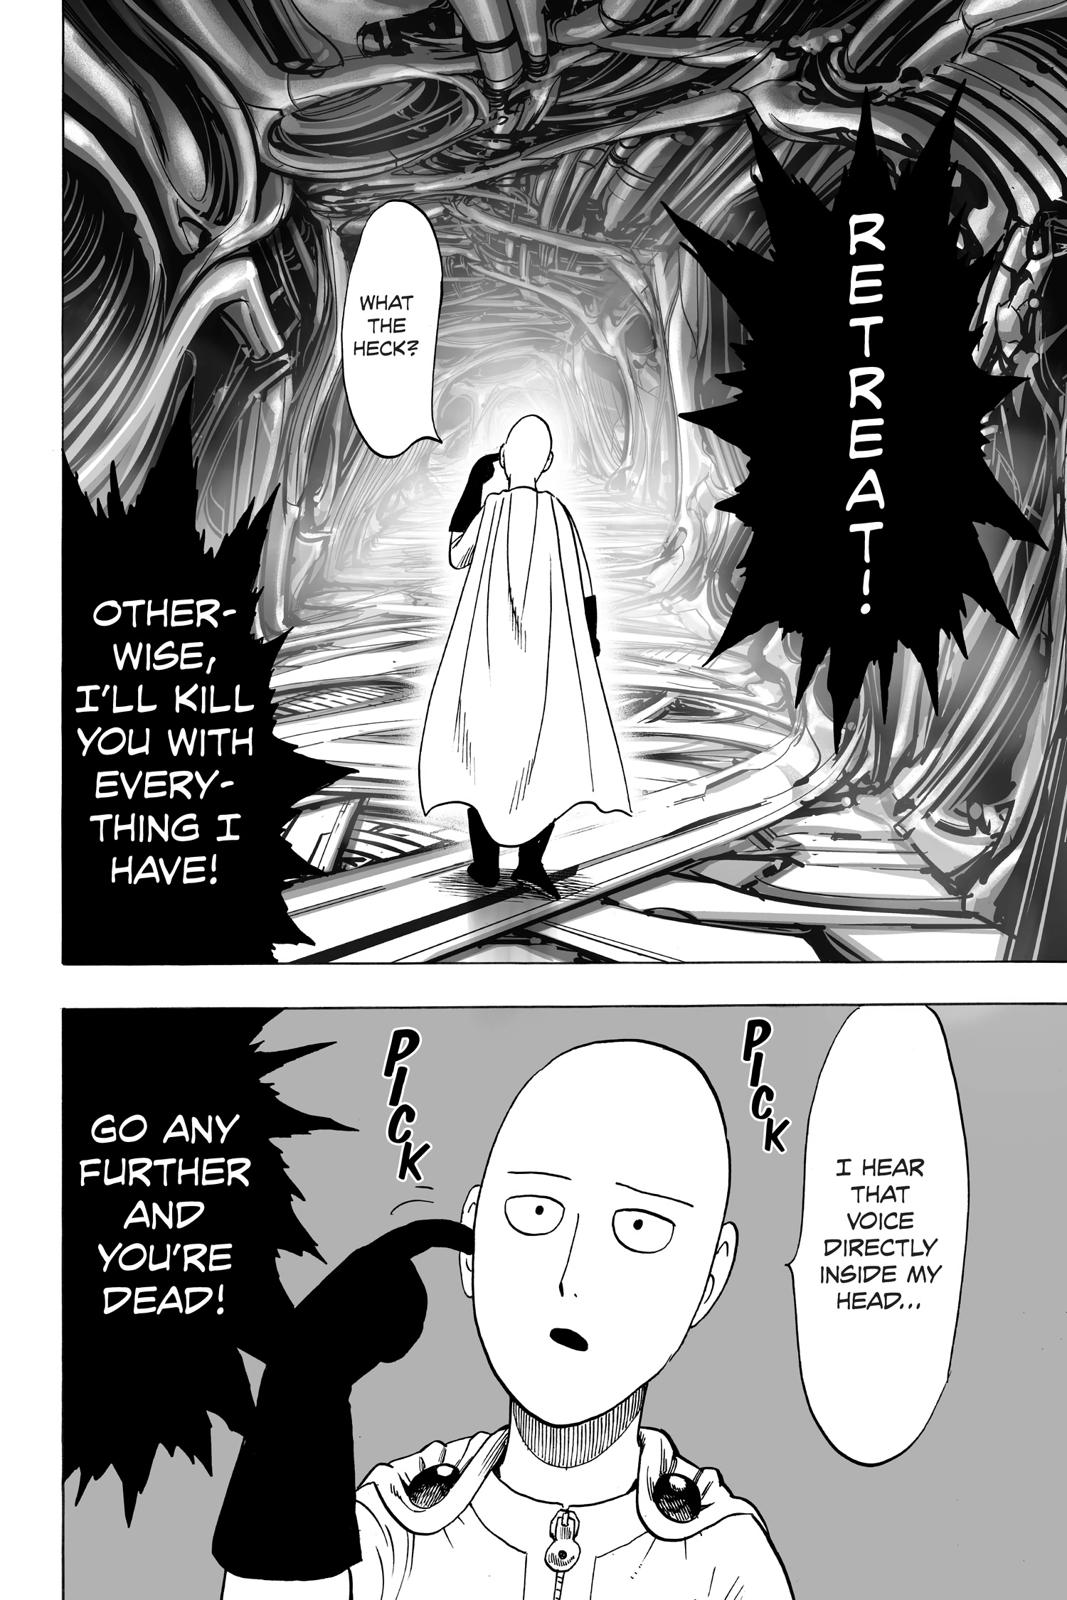 One-Punch Man, Punch 33 image 16